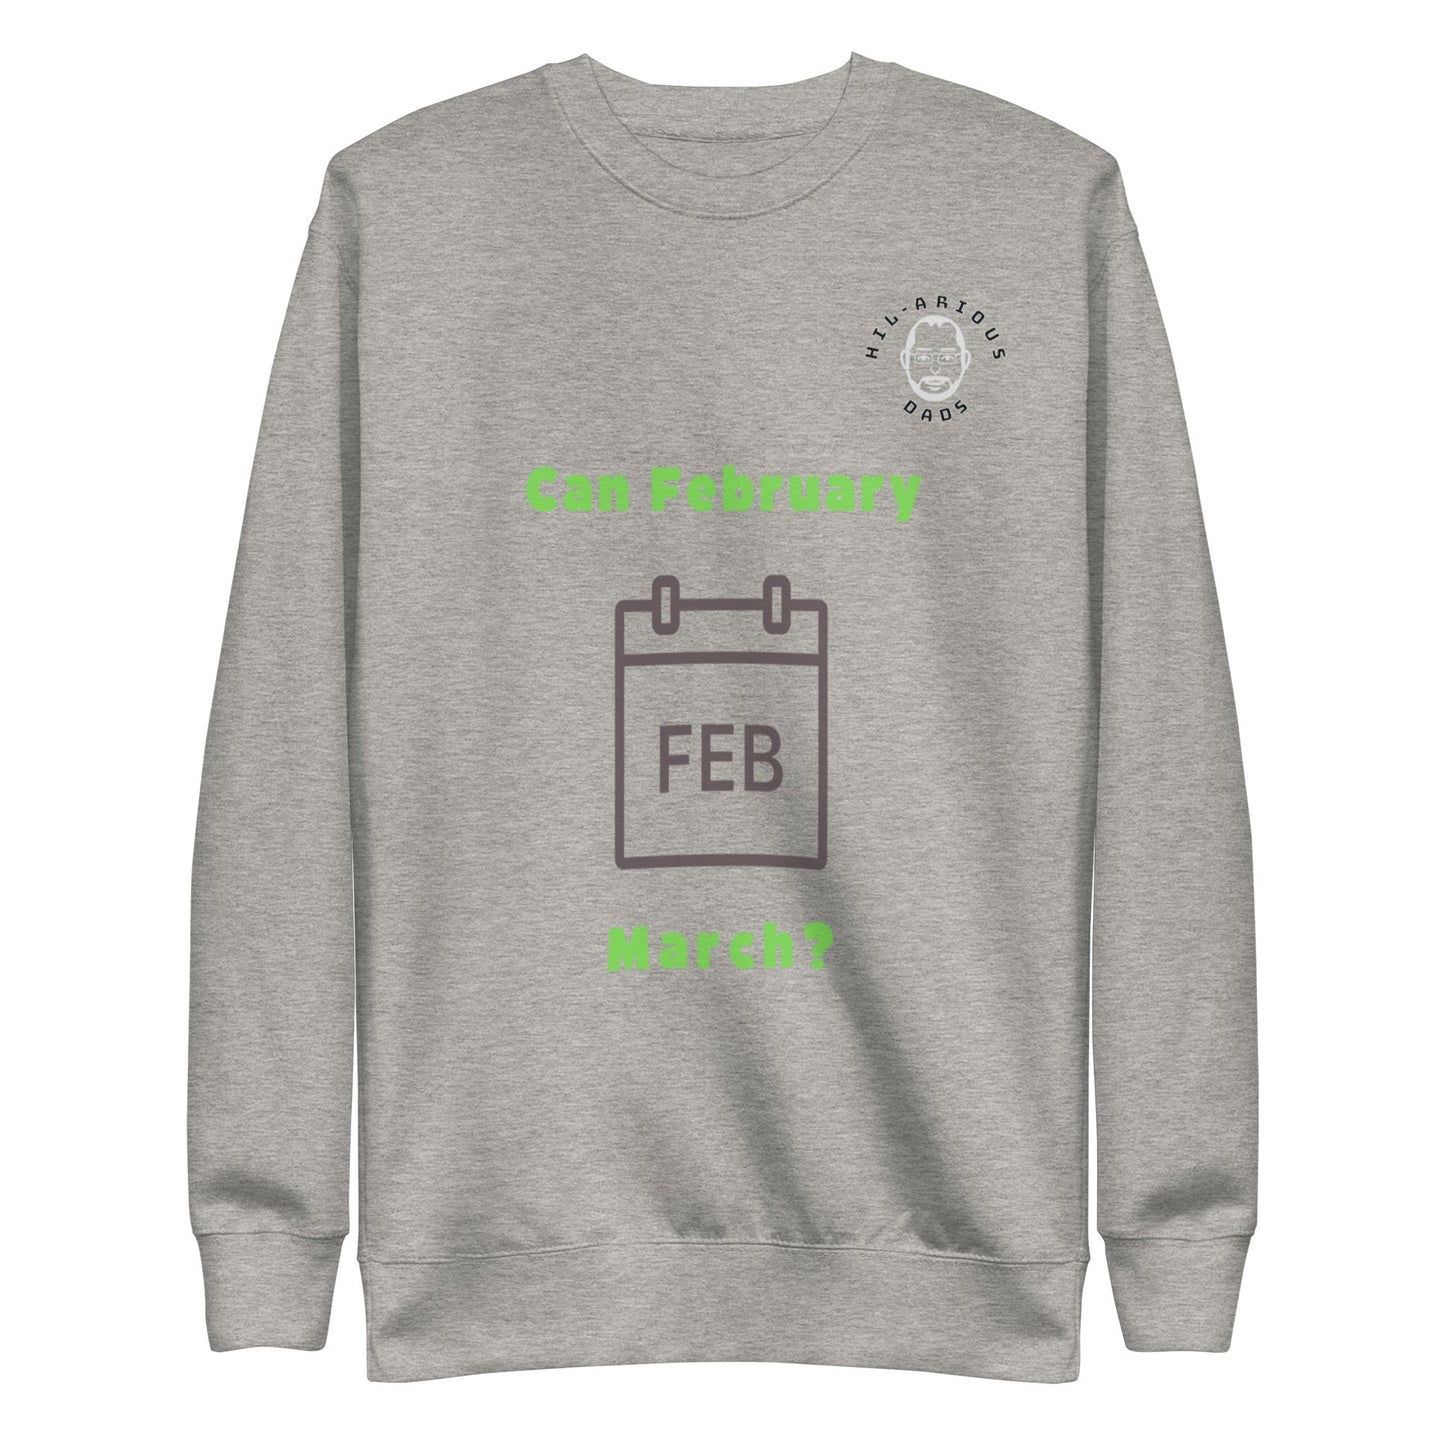 Can February March?-Sweatshirt - Hil-arious Dads